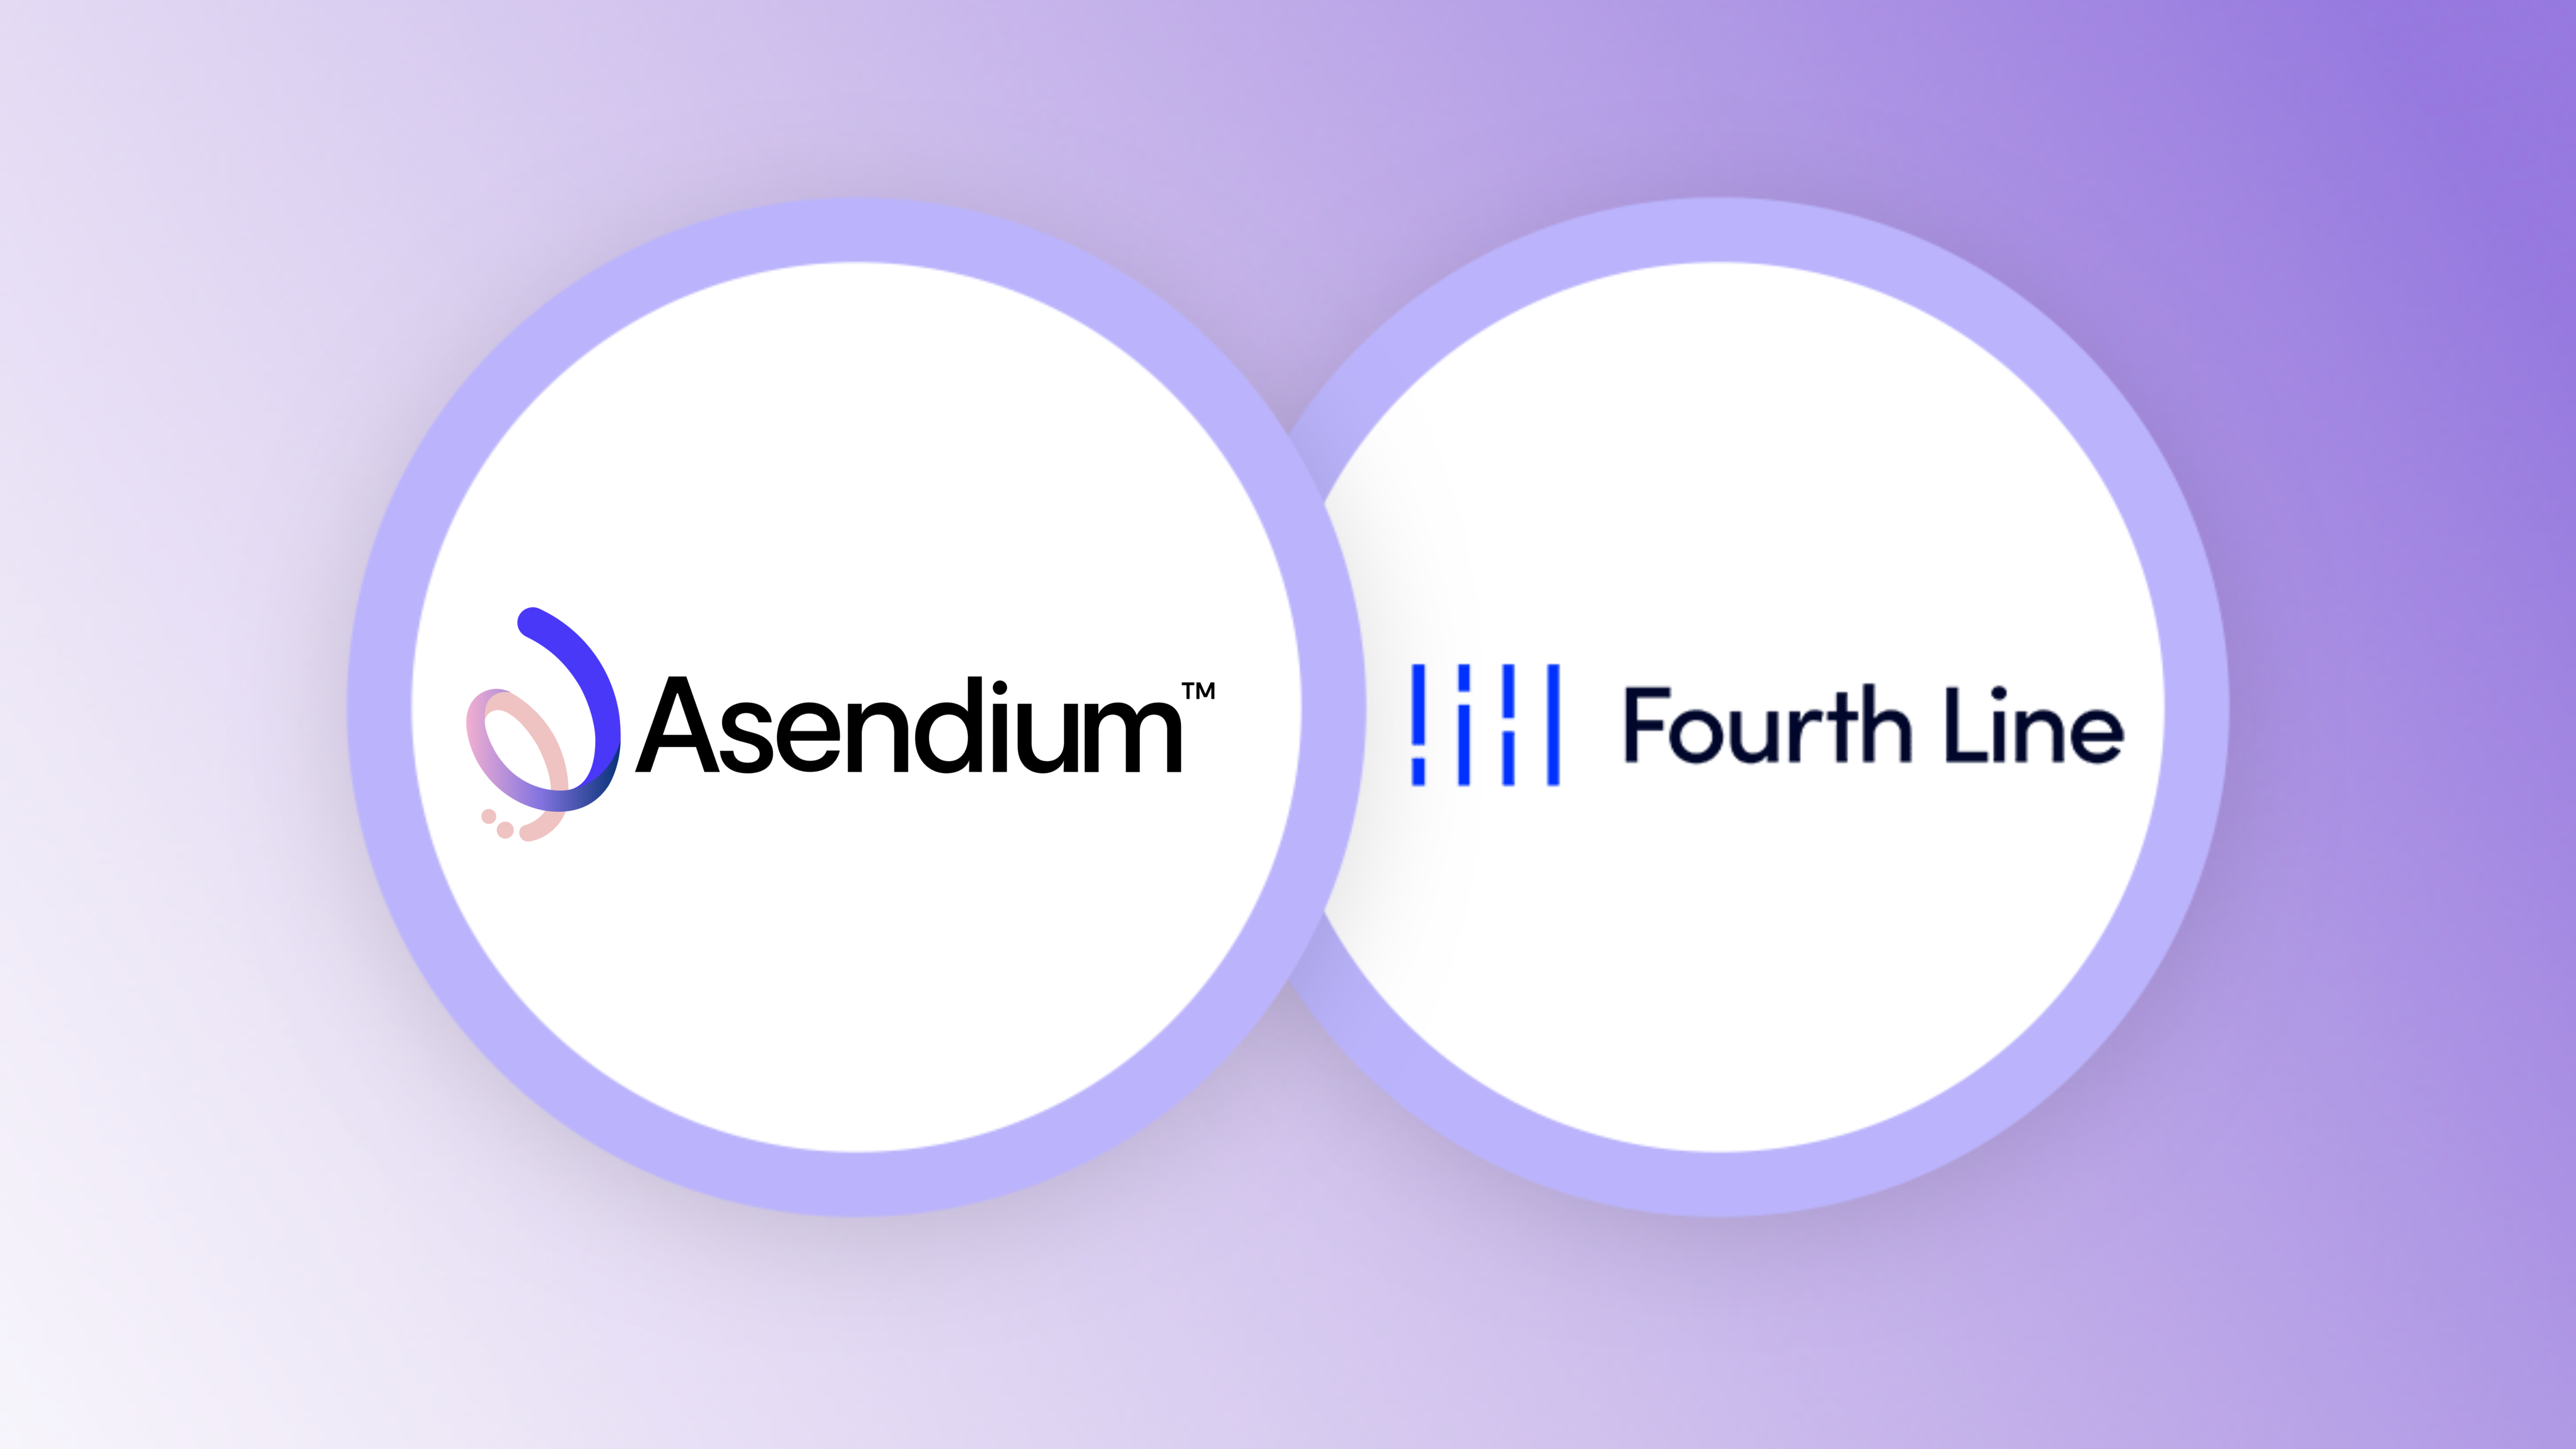 Graphic depicting both Asendium's and Fouth Line's logos side by side.